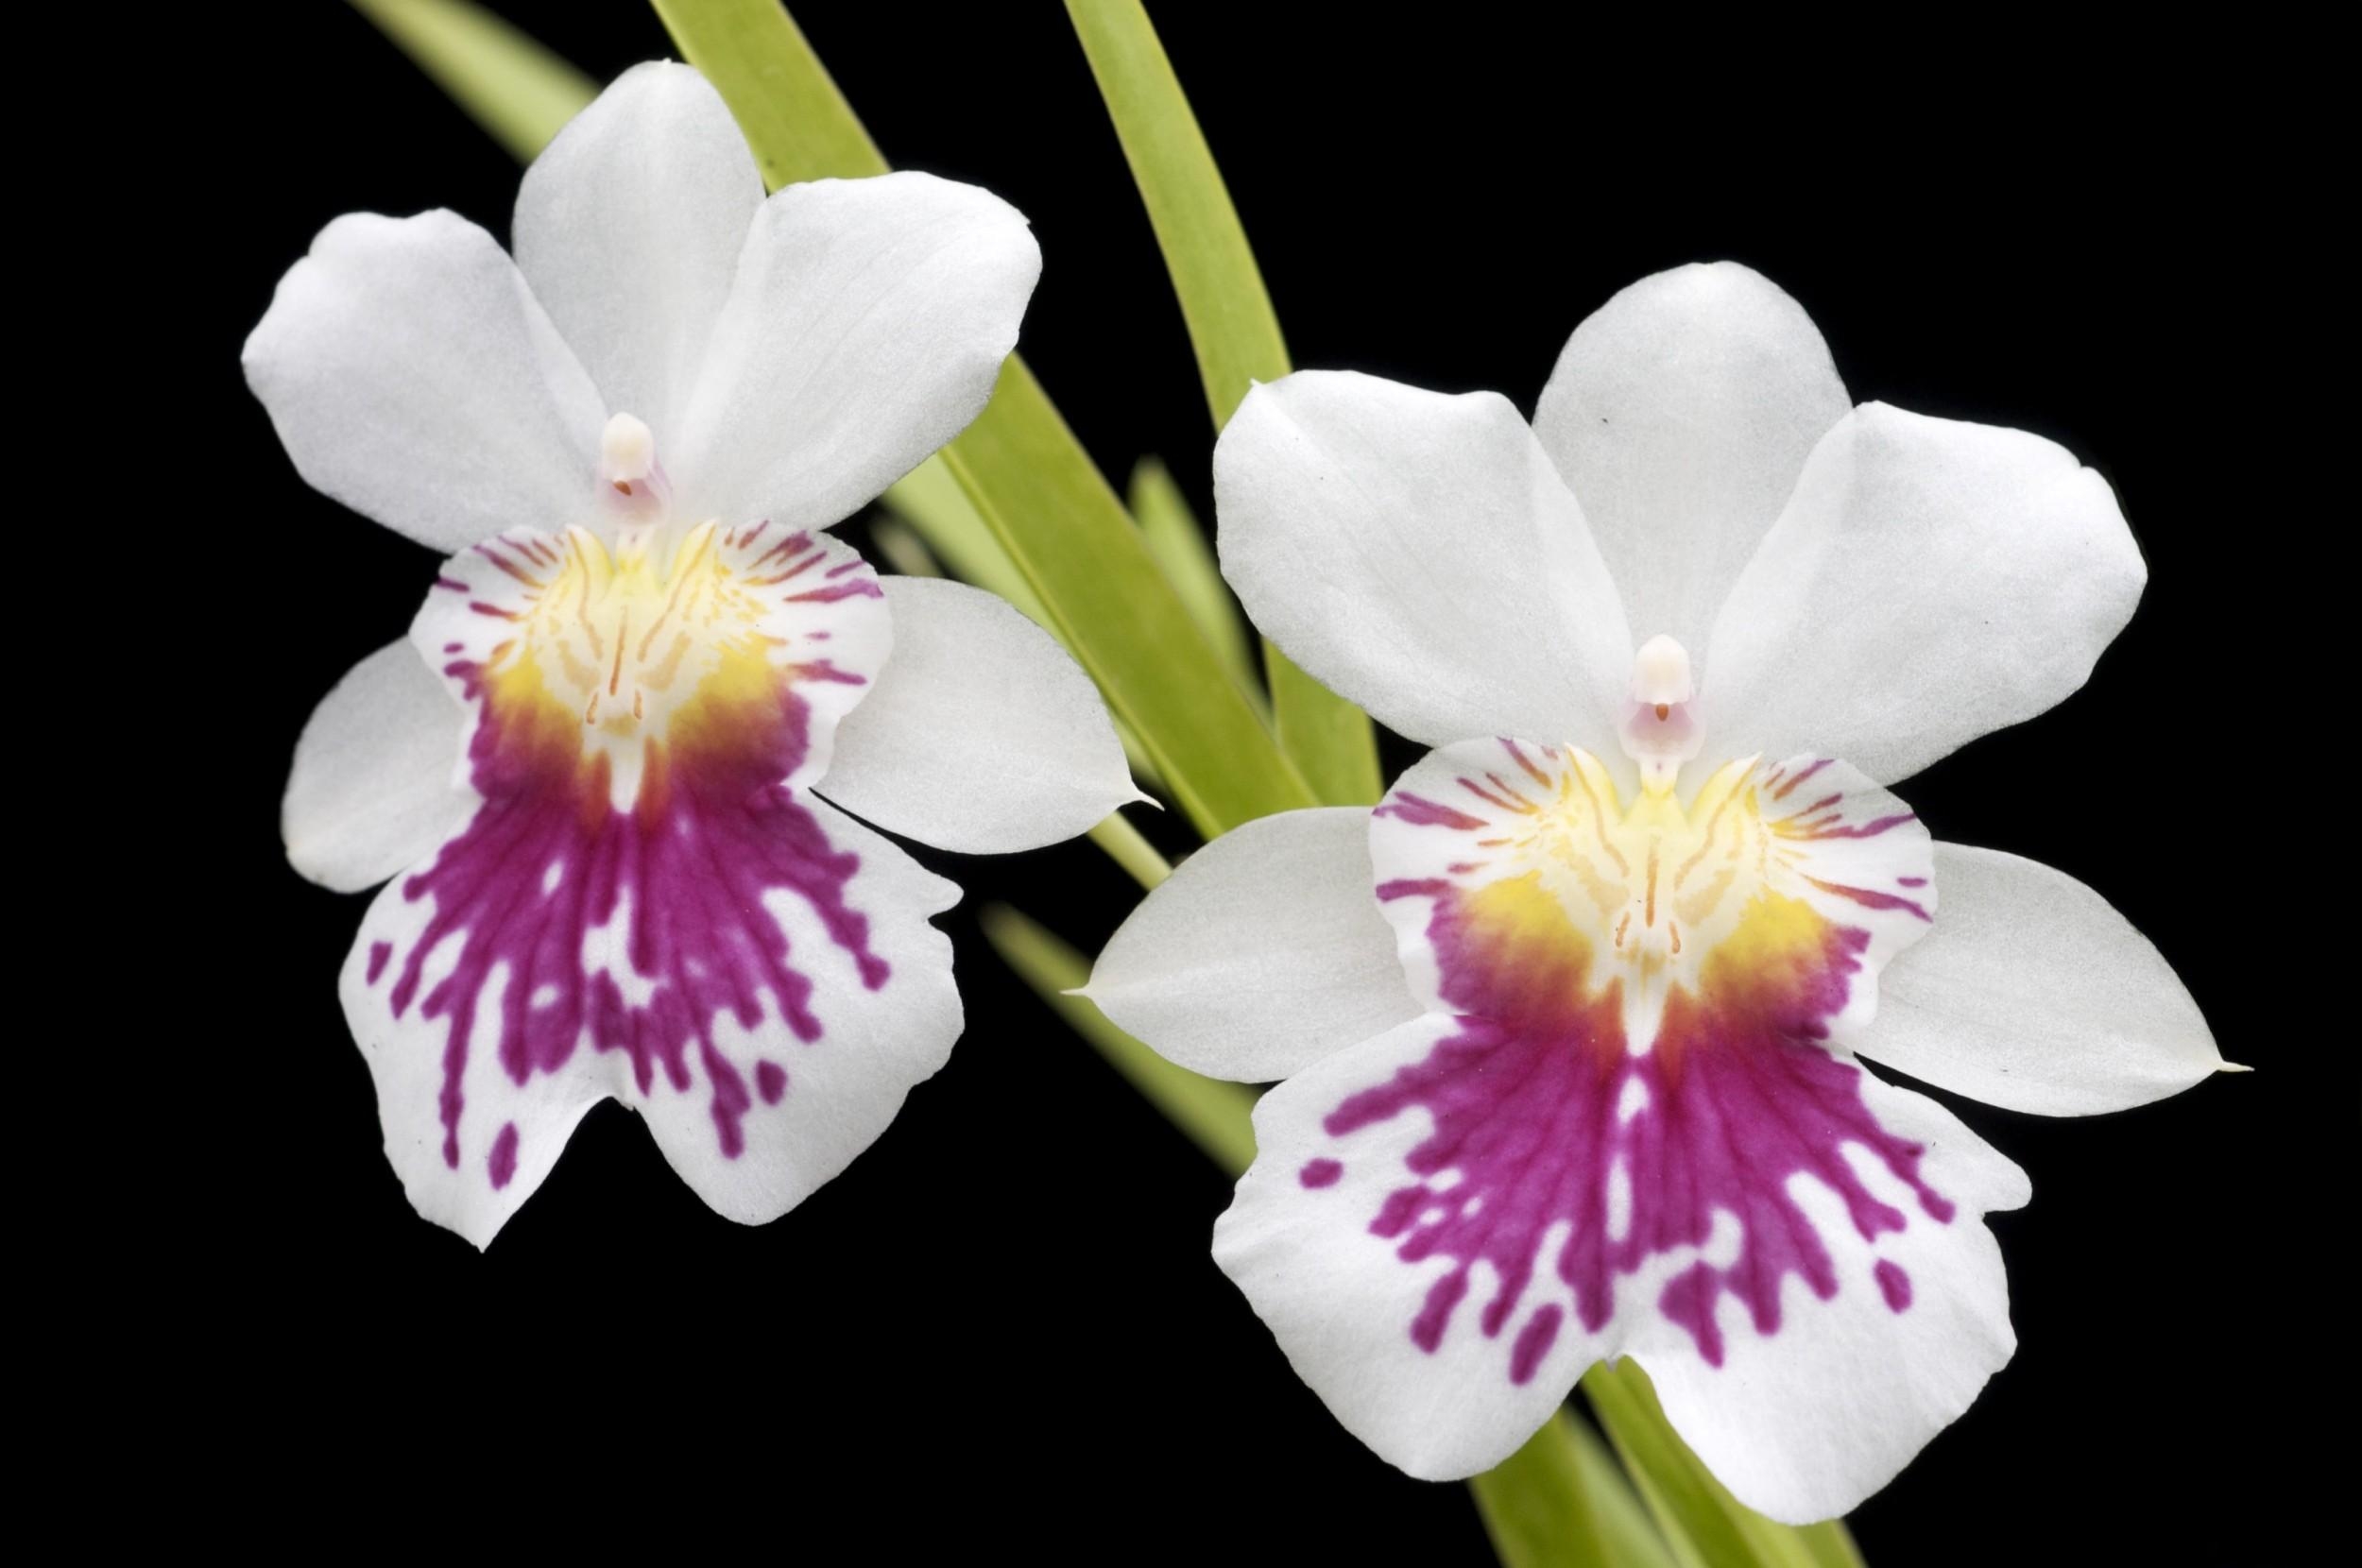 orchid, flowers, close up, black background